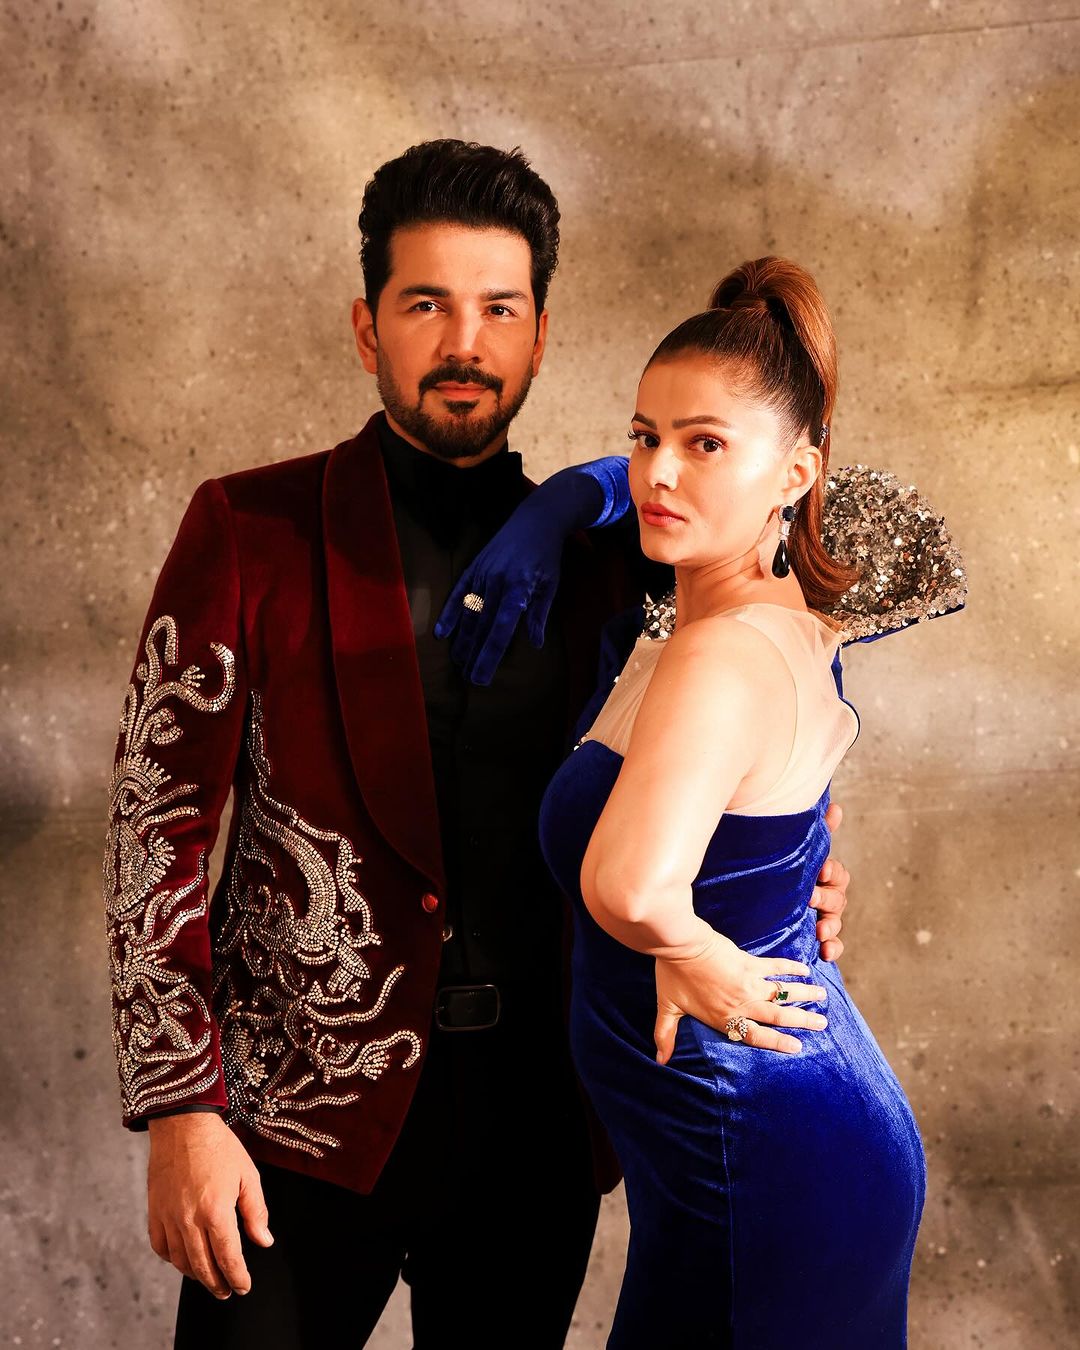 A Good Hubby Makes A Good Wifey! See How Our Handsome Abhinav Shukla Always Stands For His Wife Rubina Dilaik As Like Pillar!